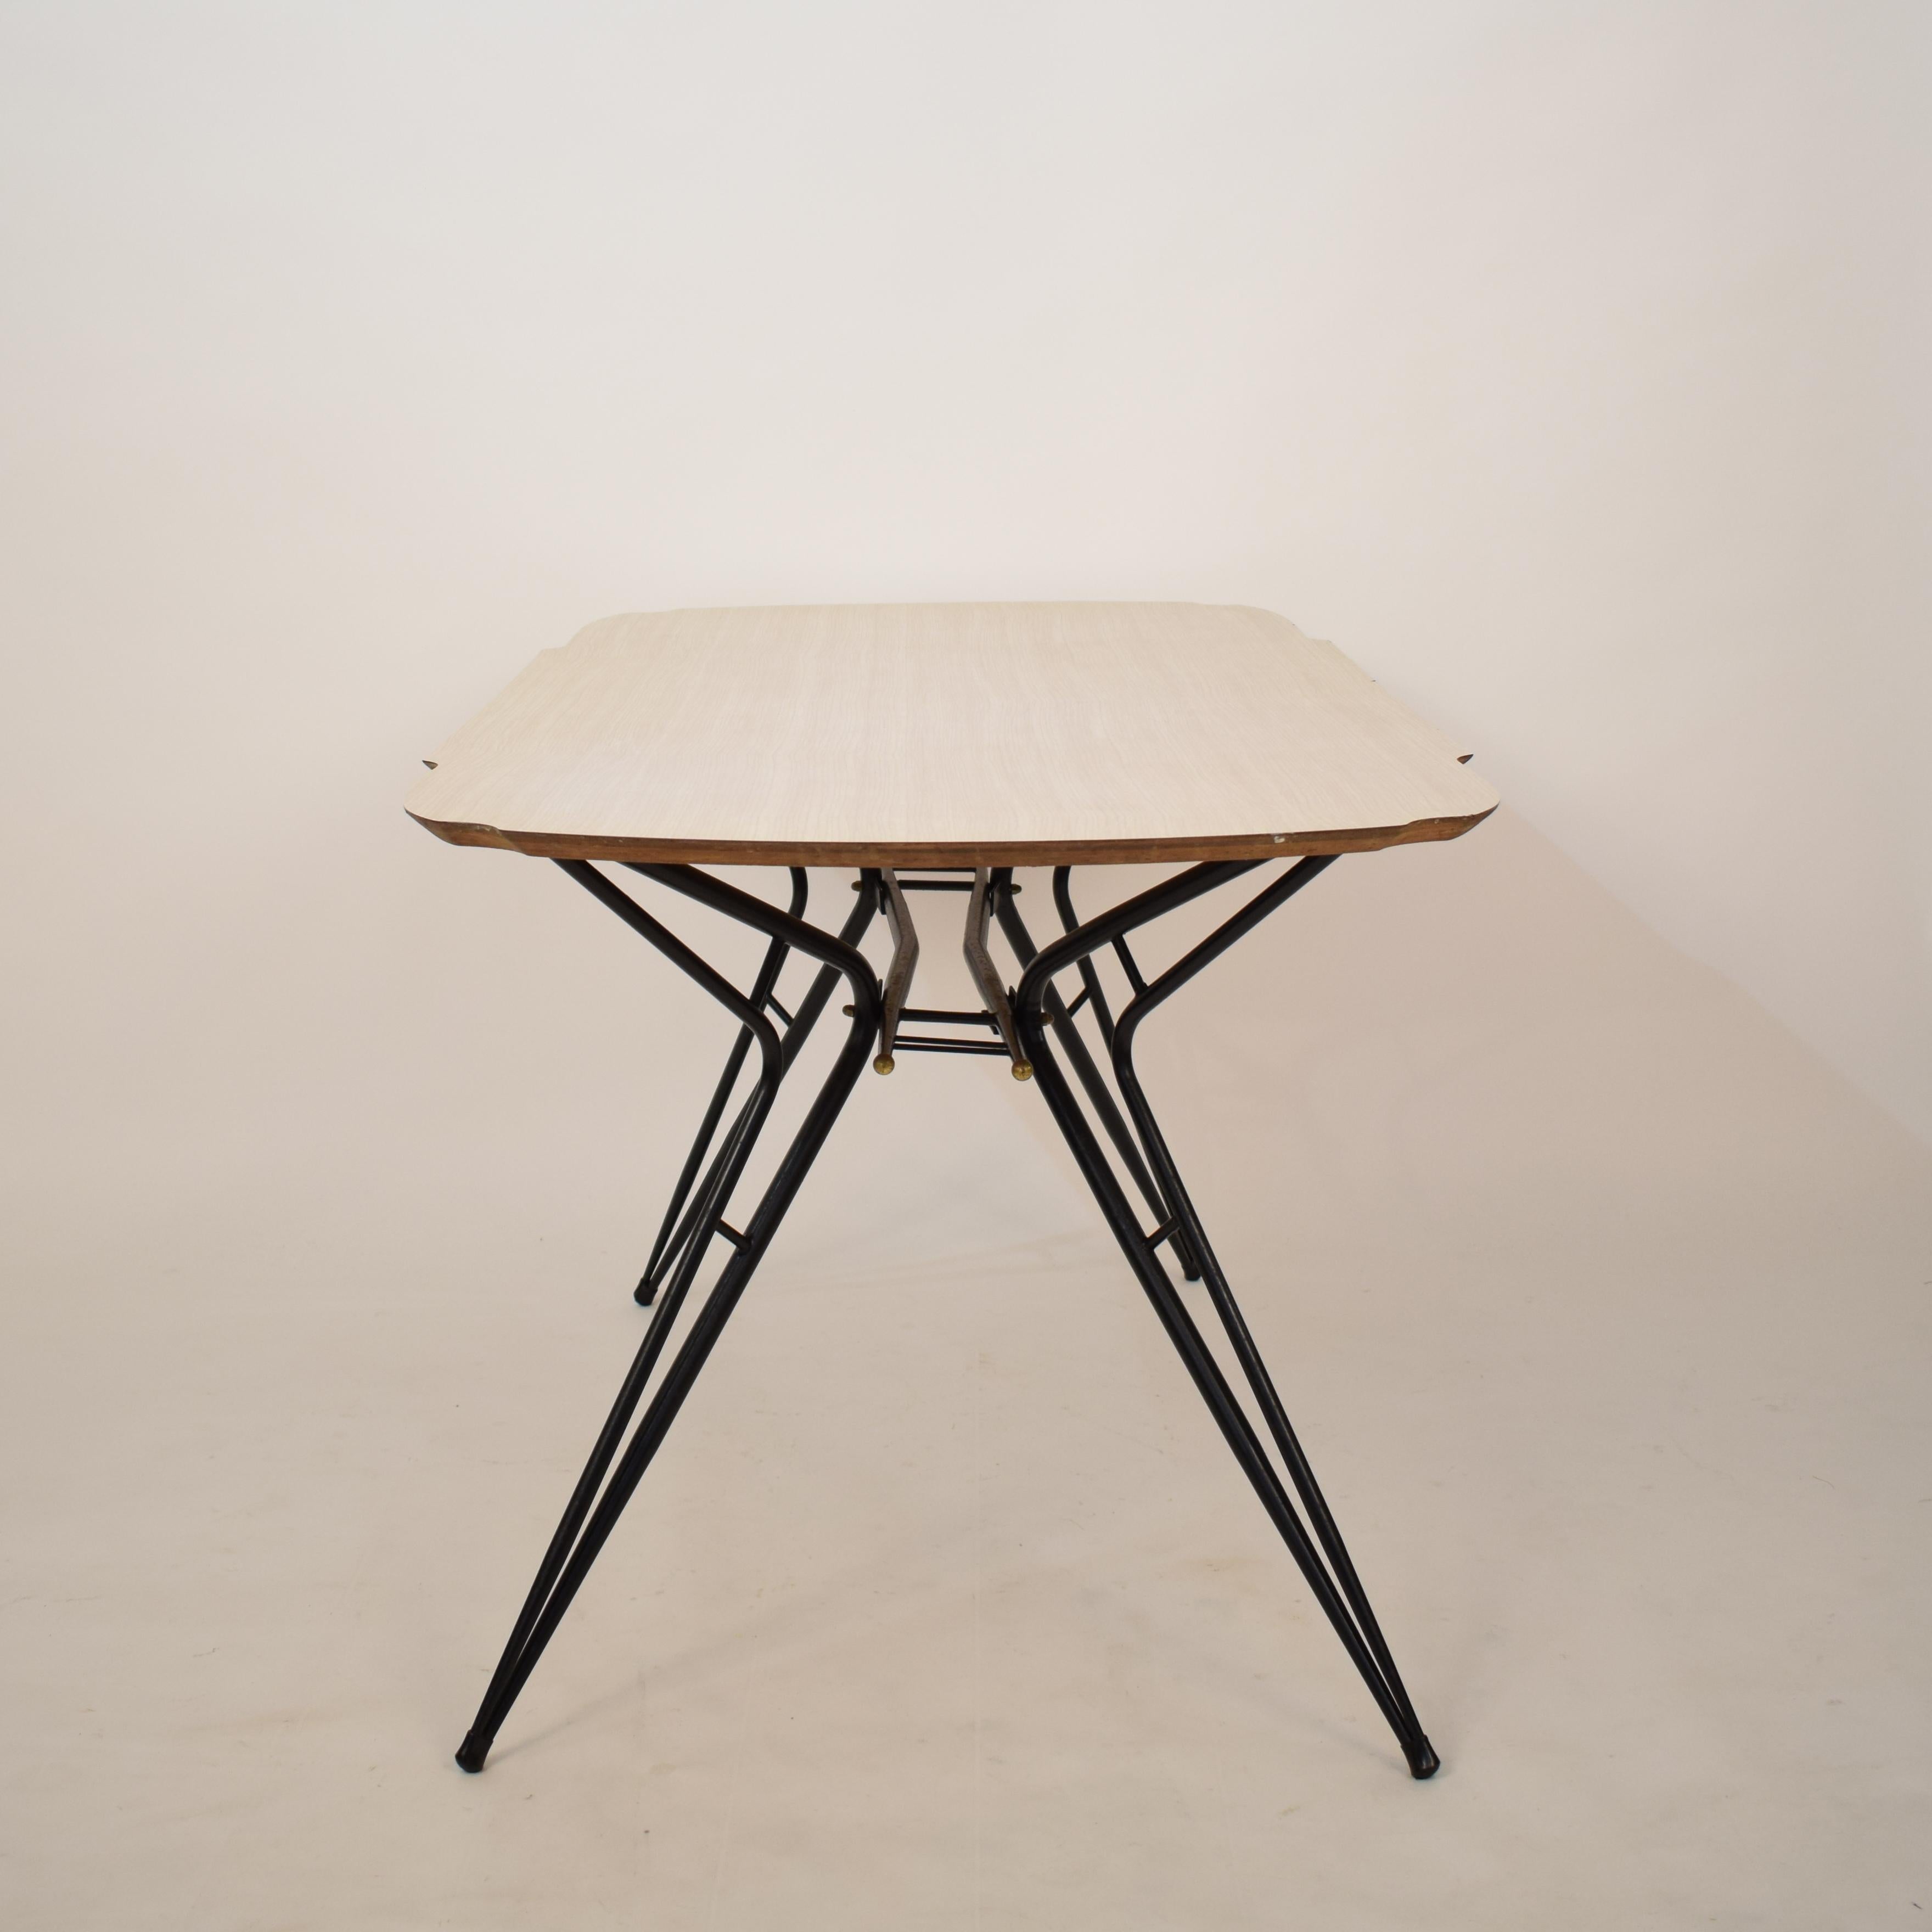 Midcentury Italian Black and White Dining Table Attributed to Ico Parisi, 1958 For Sale 6